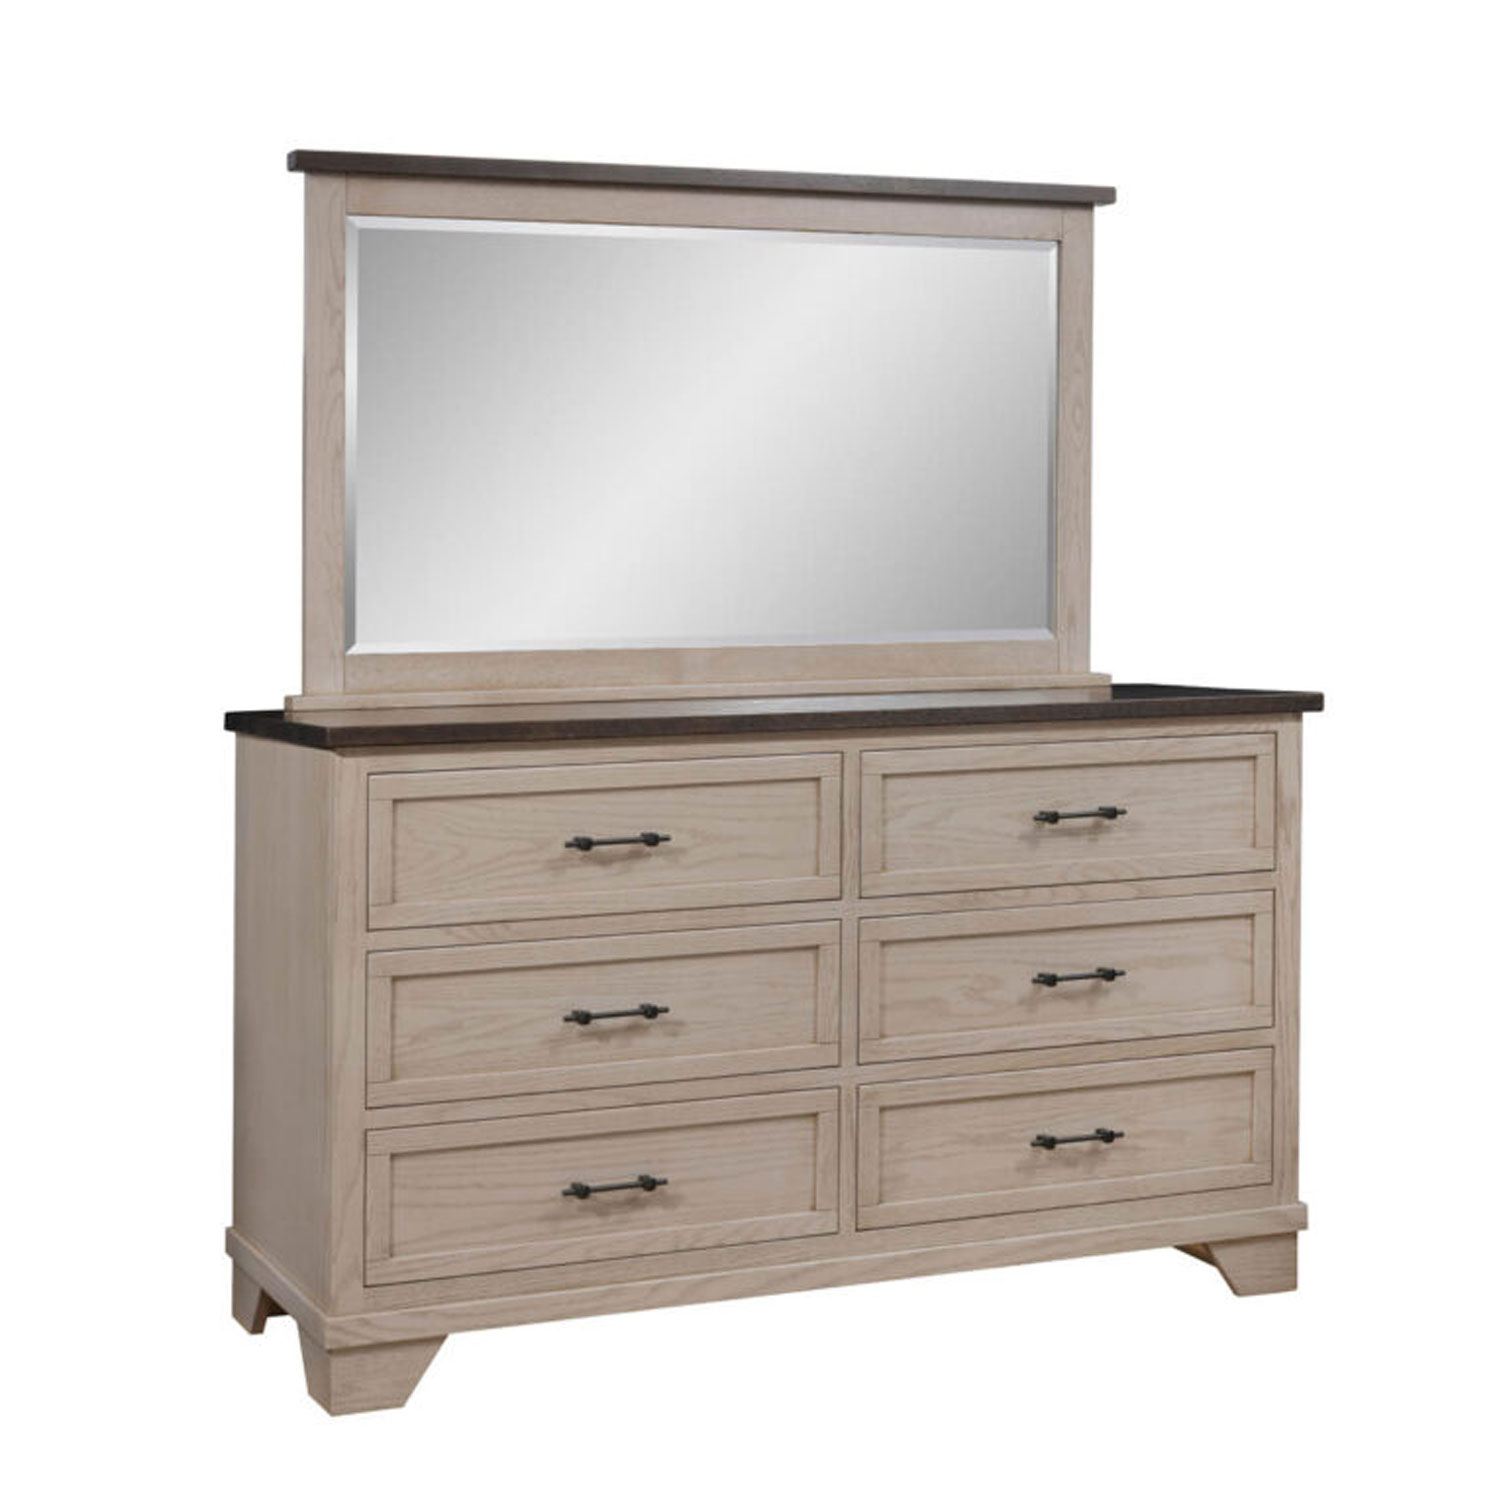 Easy Times Regular Dresser and Mirror